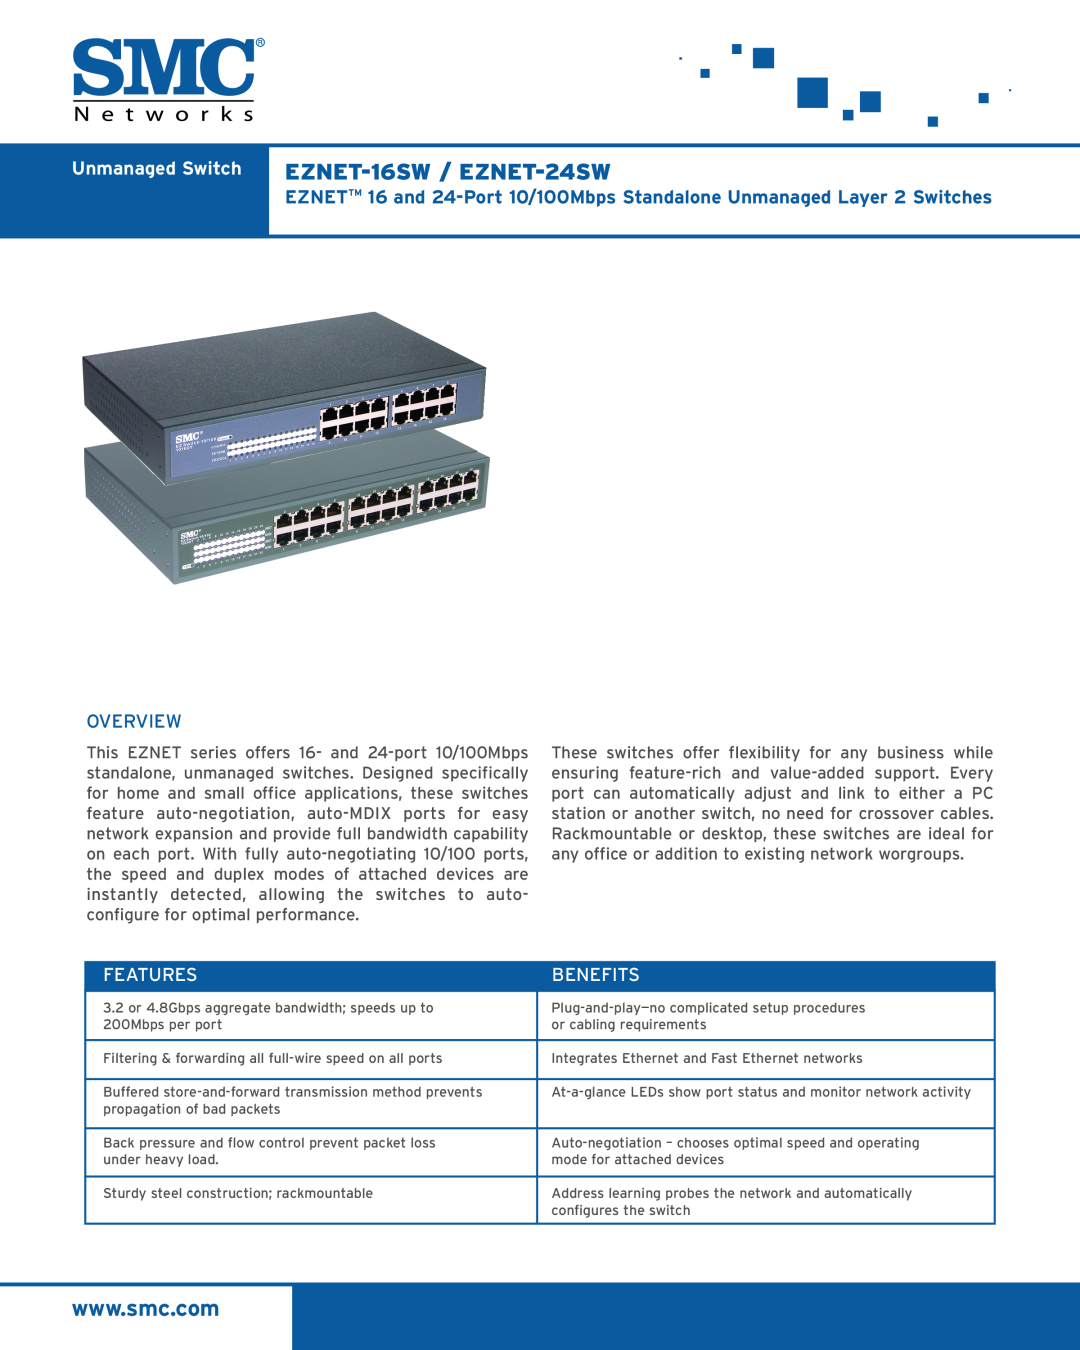 SMC Networks manual Unmanaged Switch EZNET-16SW / EZNET-24SW, Overview, Features, Benefits 